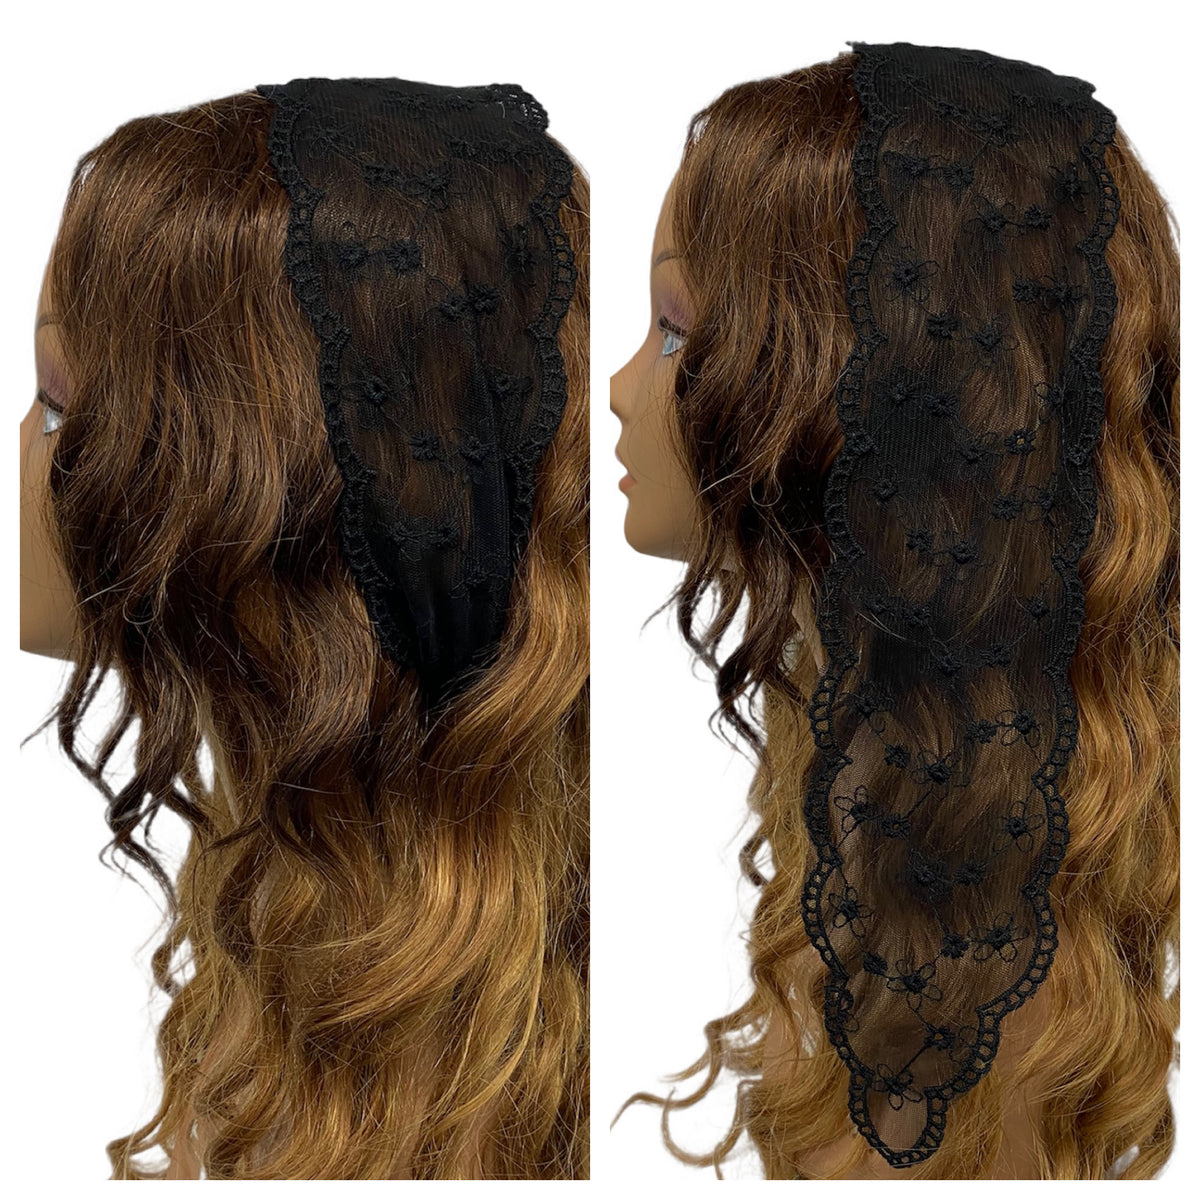 84-02 | Skinny Lace | Floral Embroidered | Headband Scarf | Black